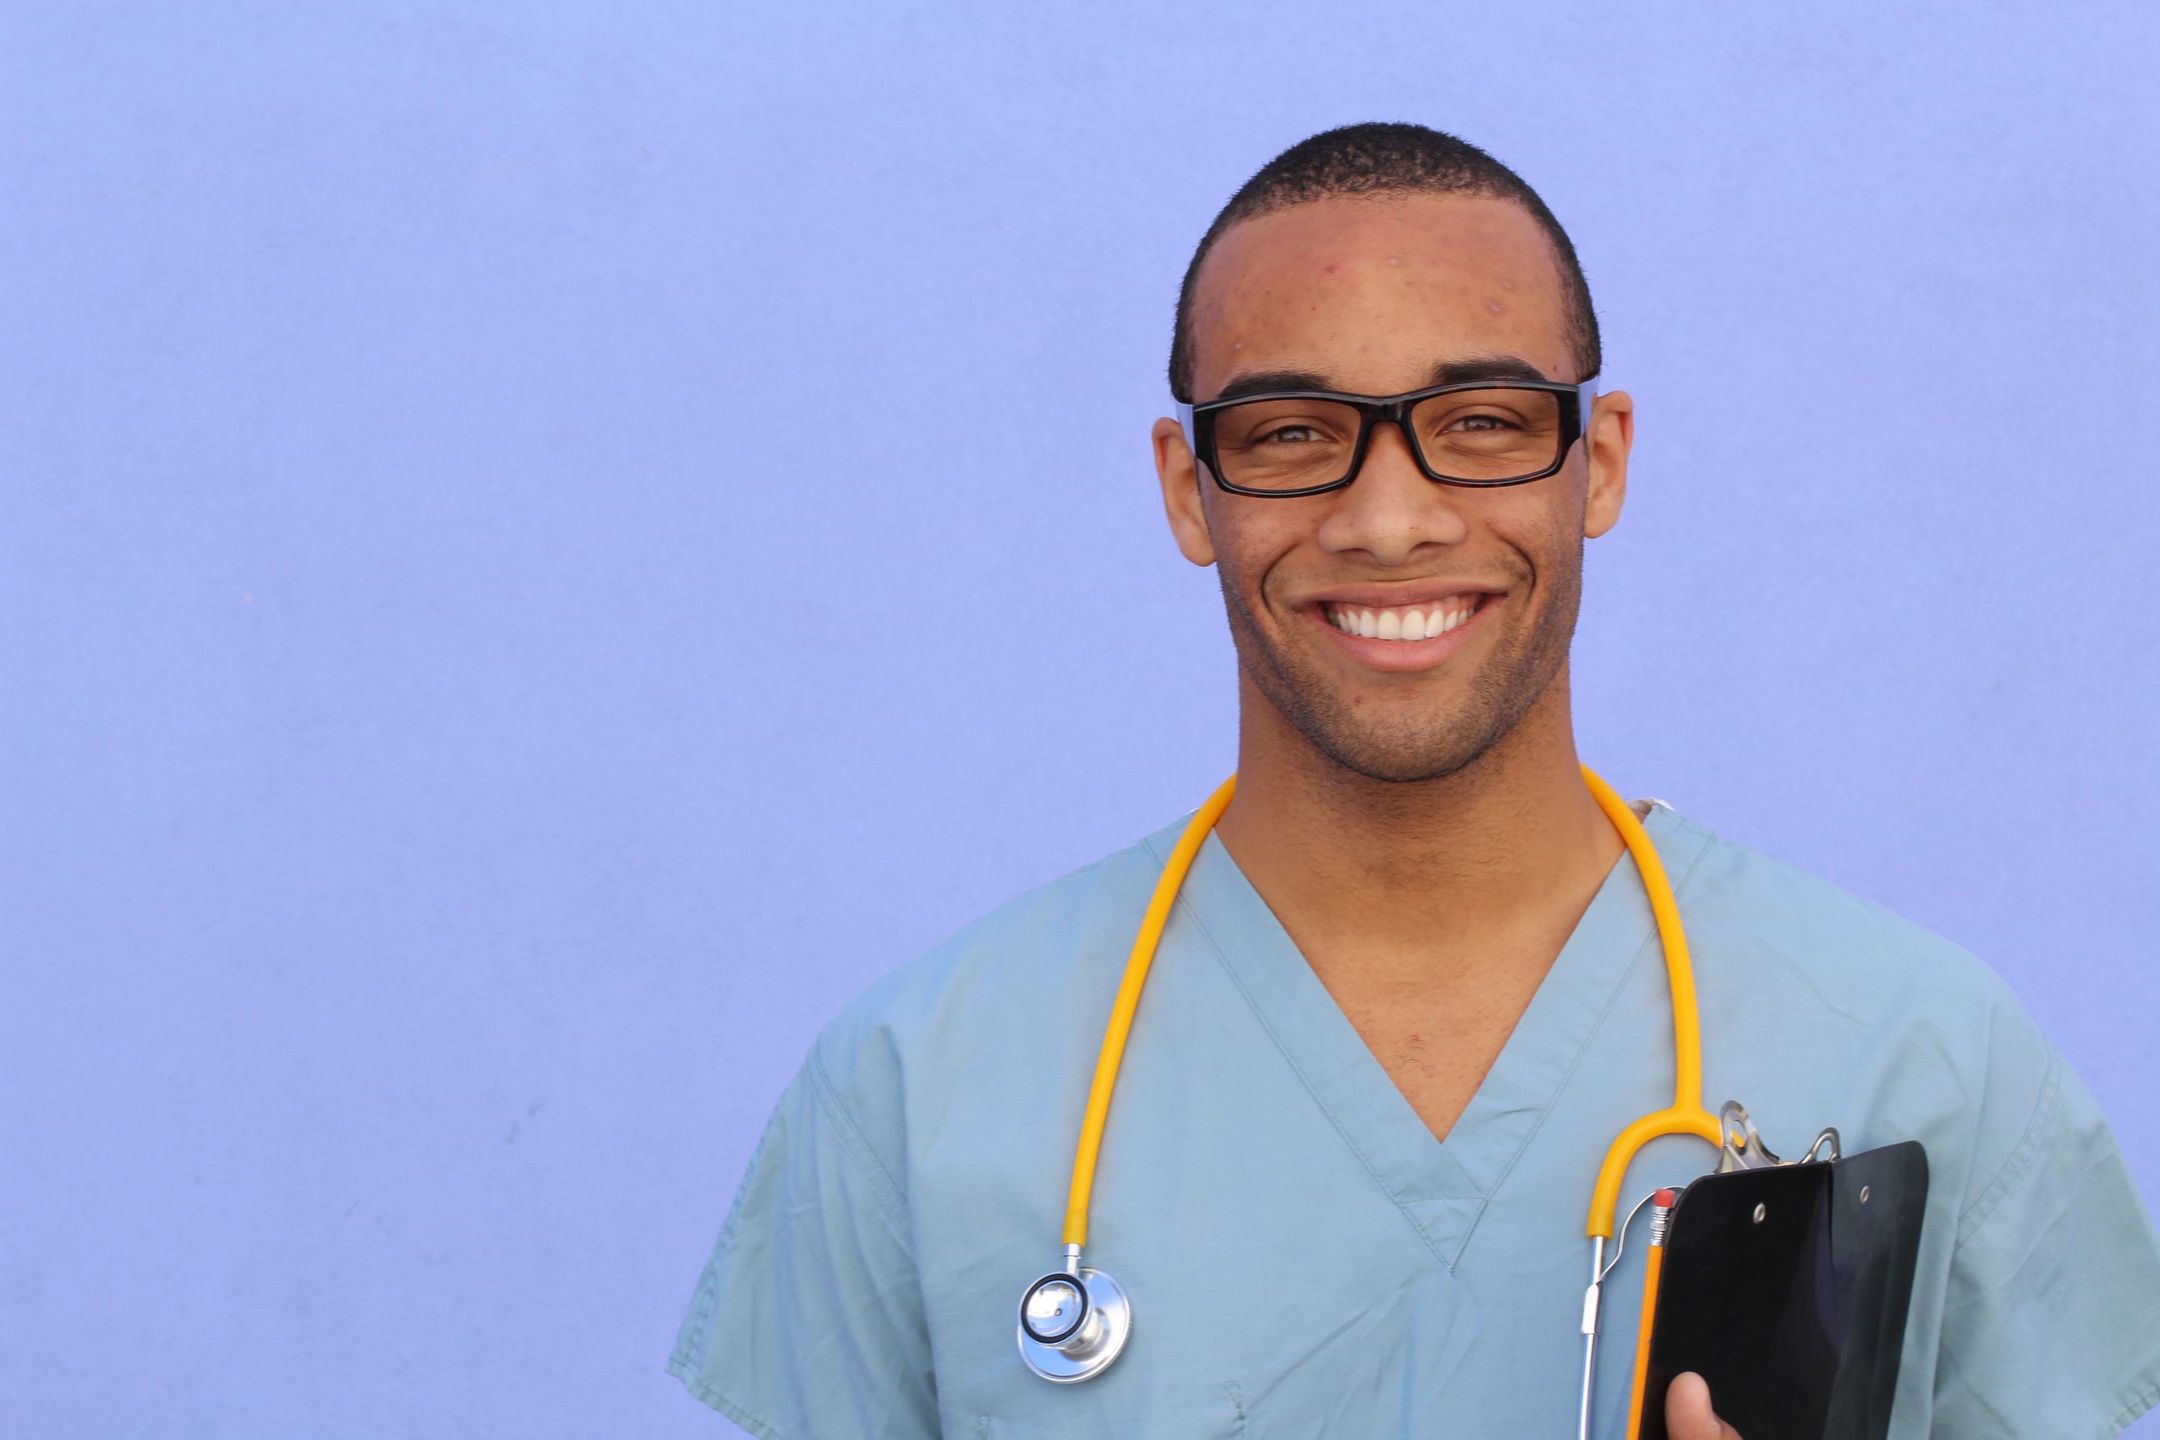 Healthcare worker wearing blue scrubs, glasses and a yellow stethoscope holding a clipboard and smiling at the camera